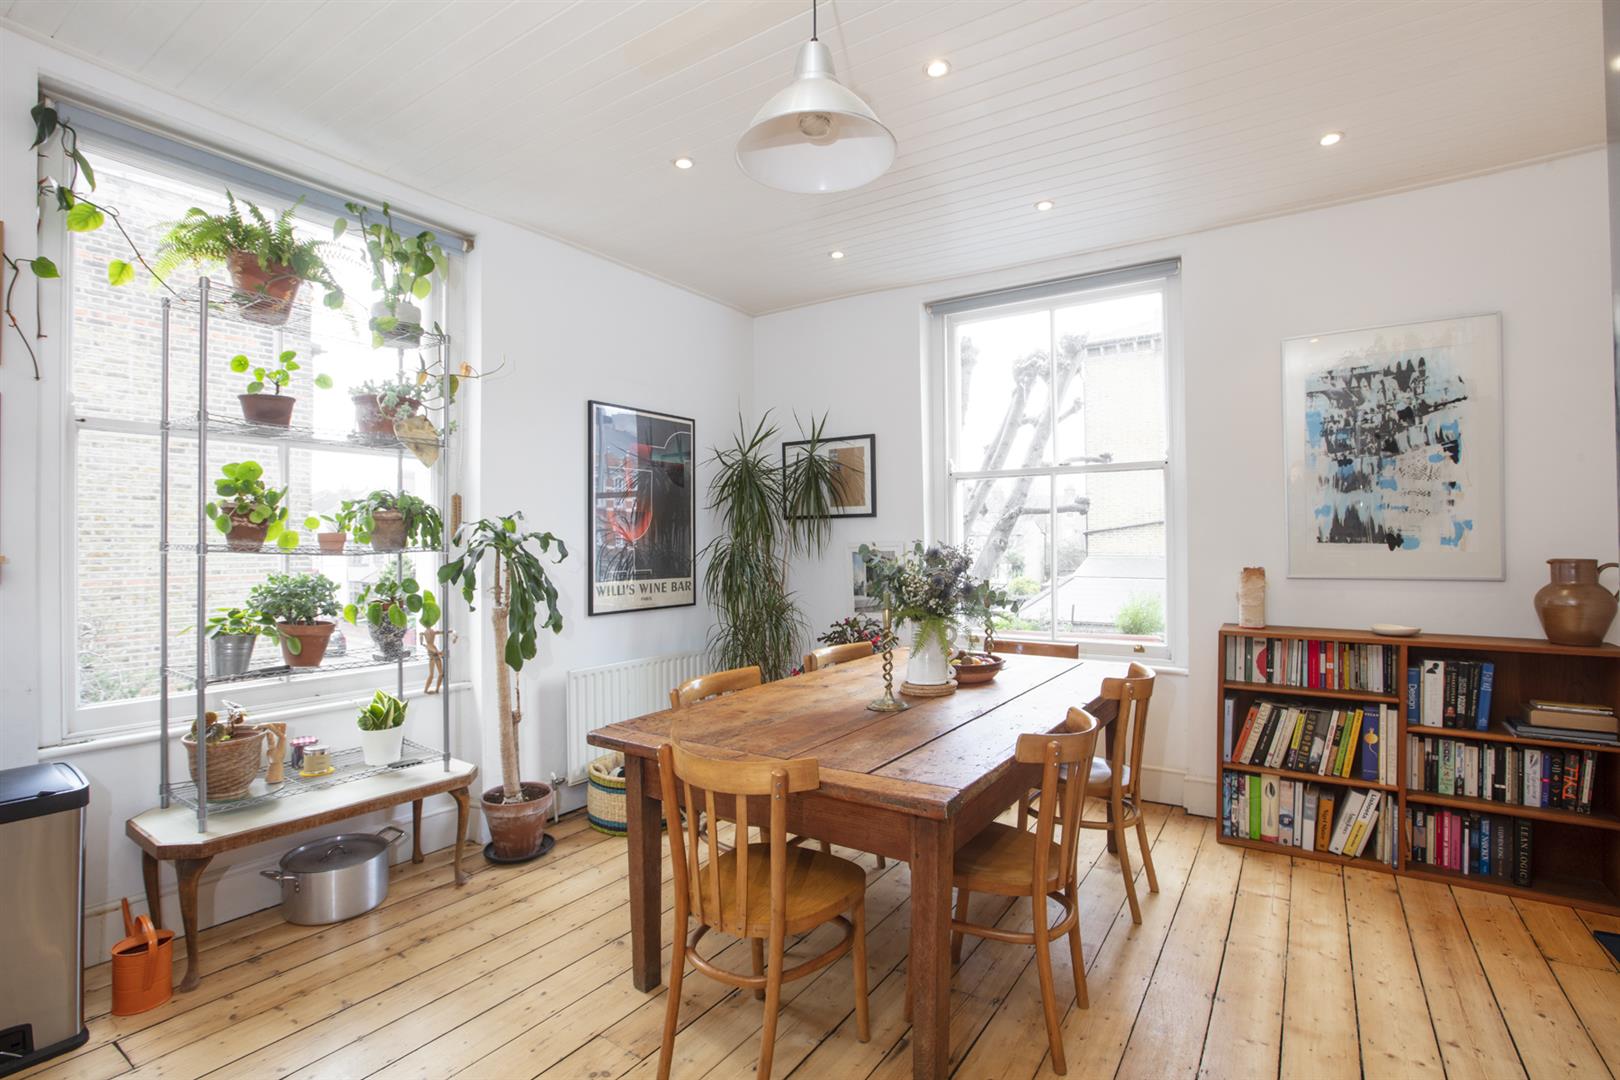 Flat - Conversion Sold in Peckham Road, Camberwell, SE5 1049 view3